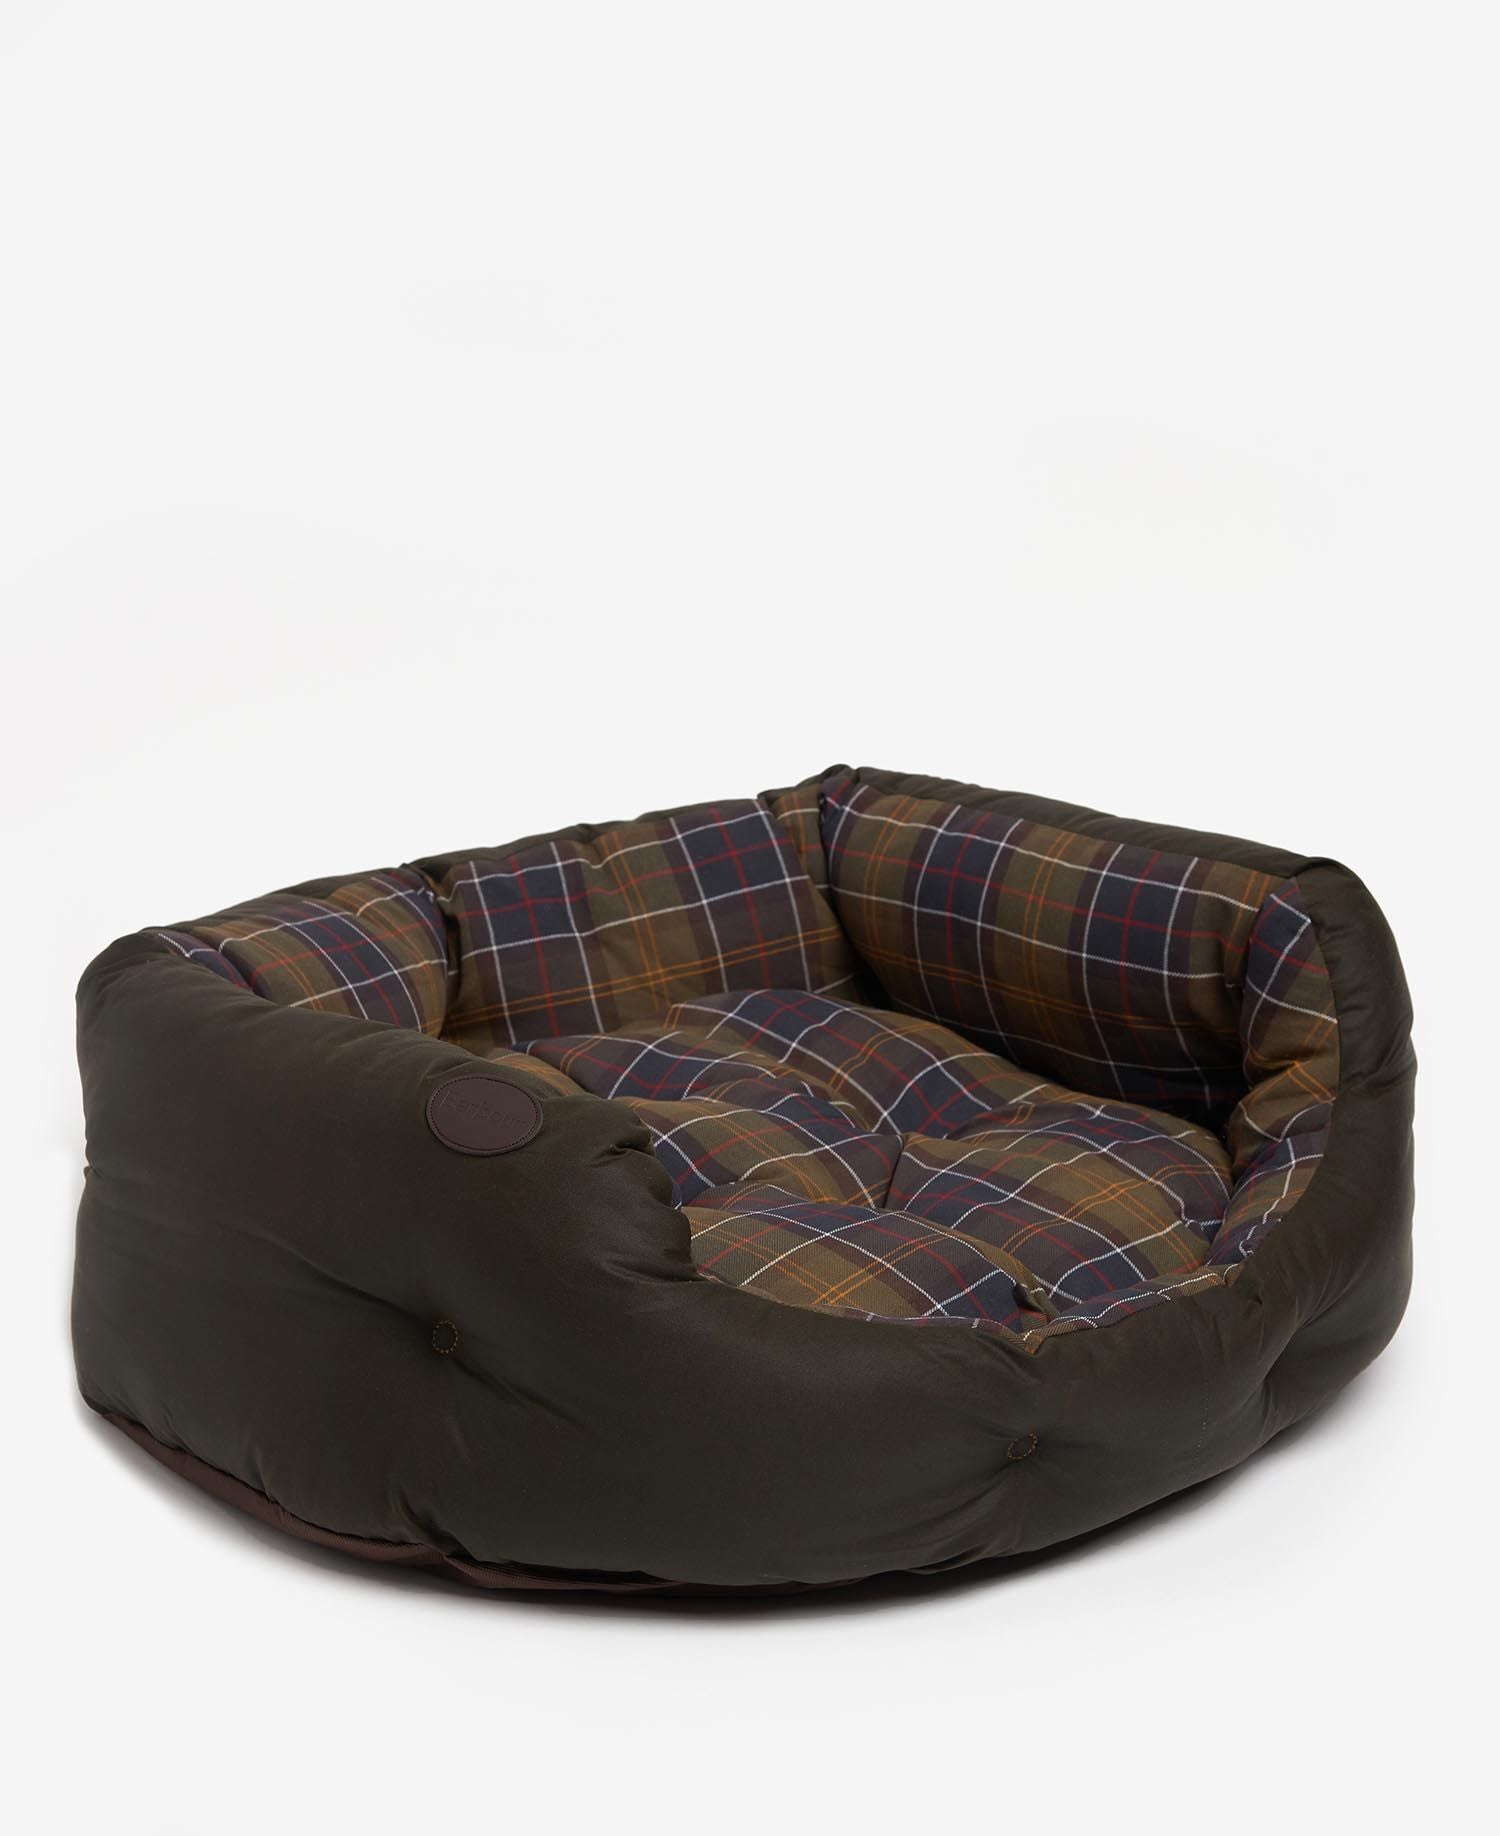 BARBOUR WAX/COTTON DOG BED 30 inch